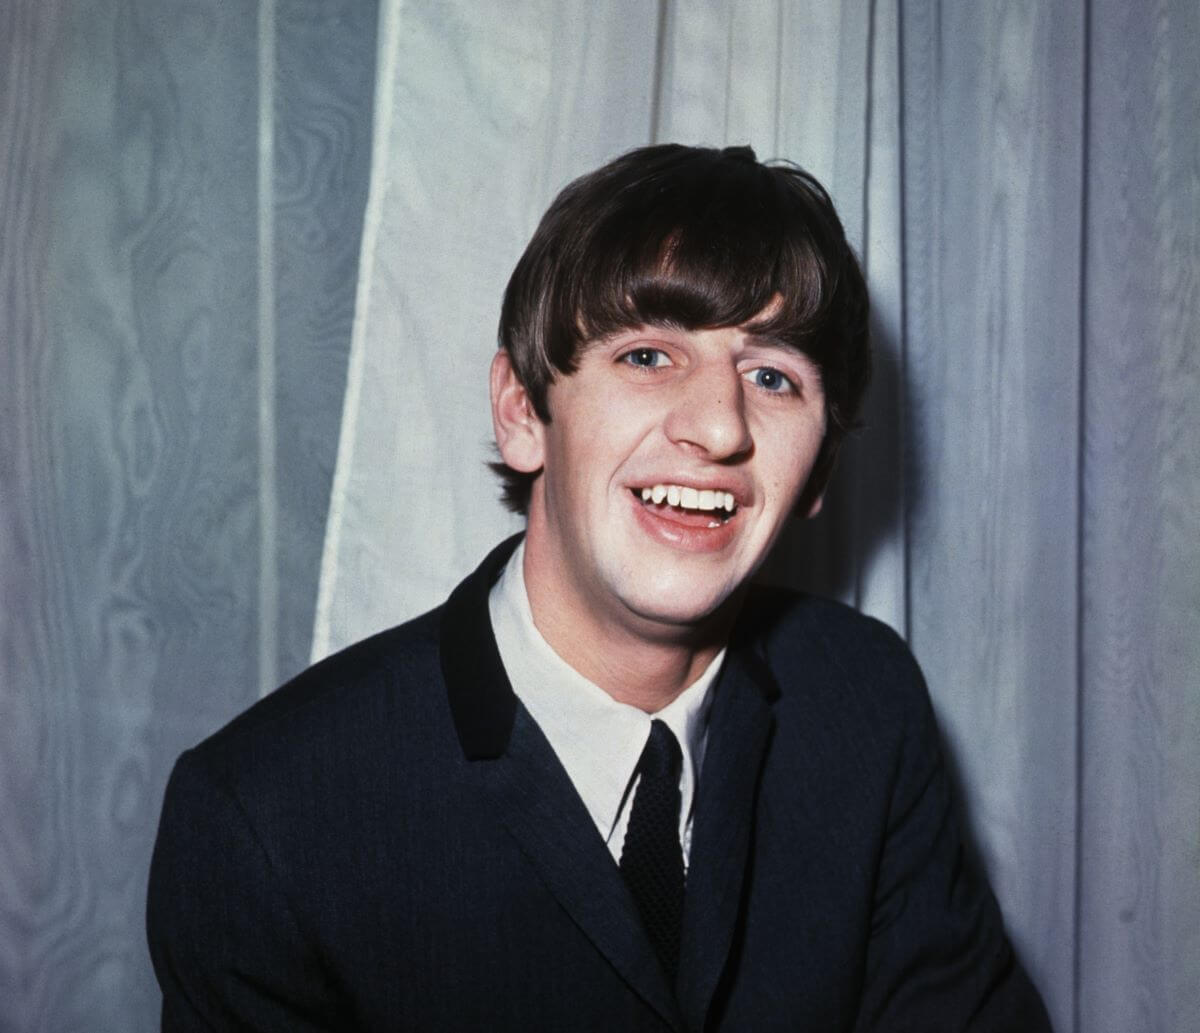 Ringo Starr wears a suit and sits in front of a gray curtain.